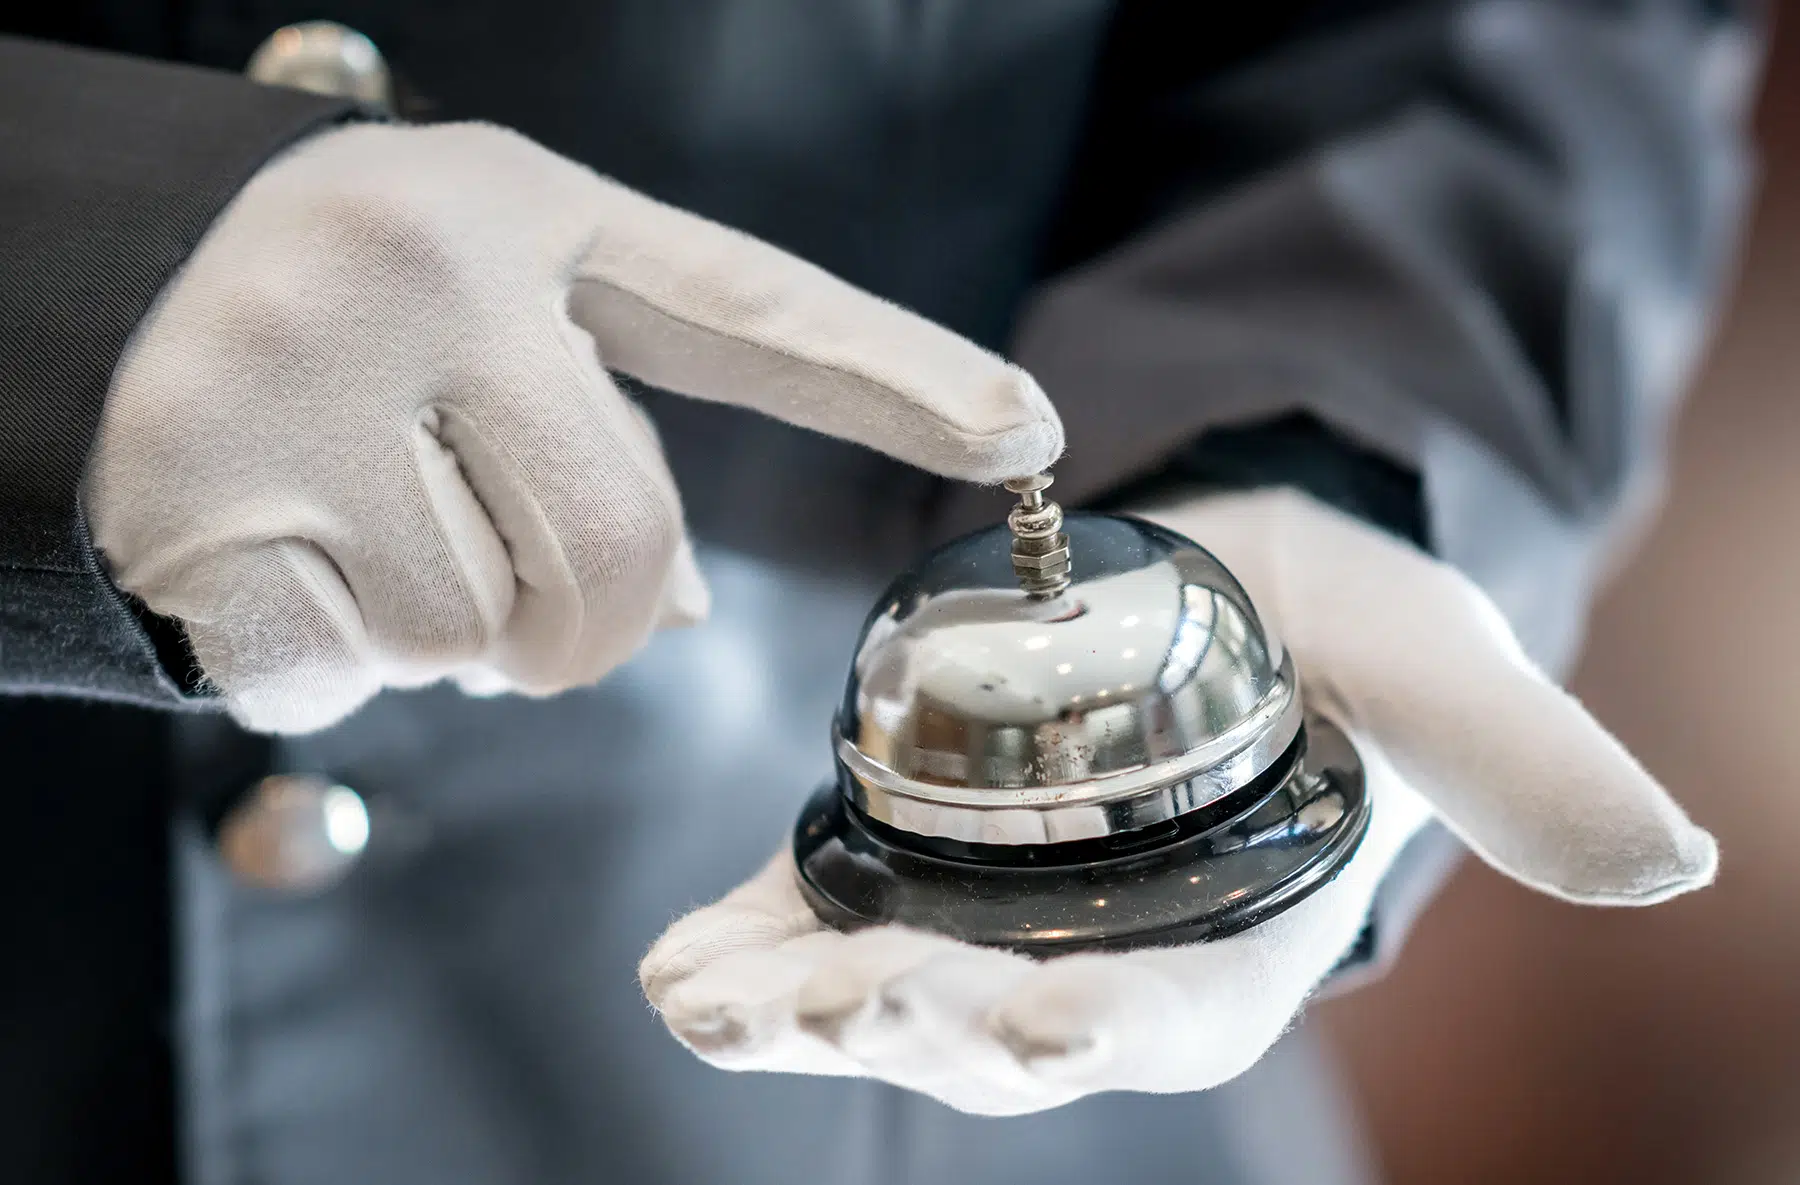 NFCW Expo's concierge service. Picture of white gloved hands holding a hotel bell.